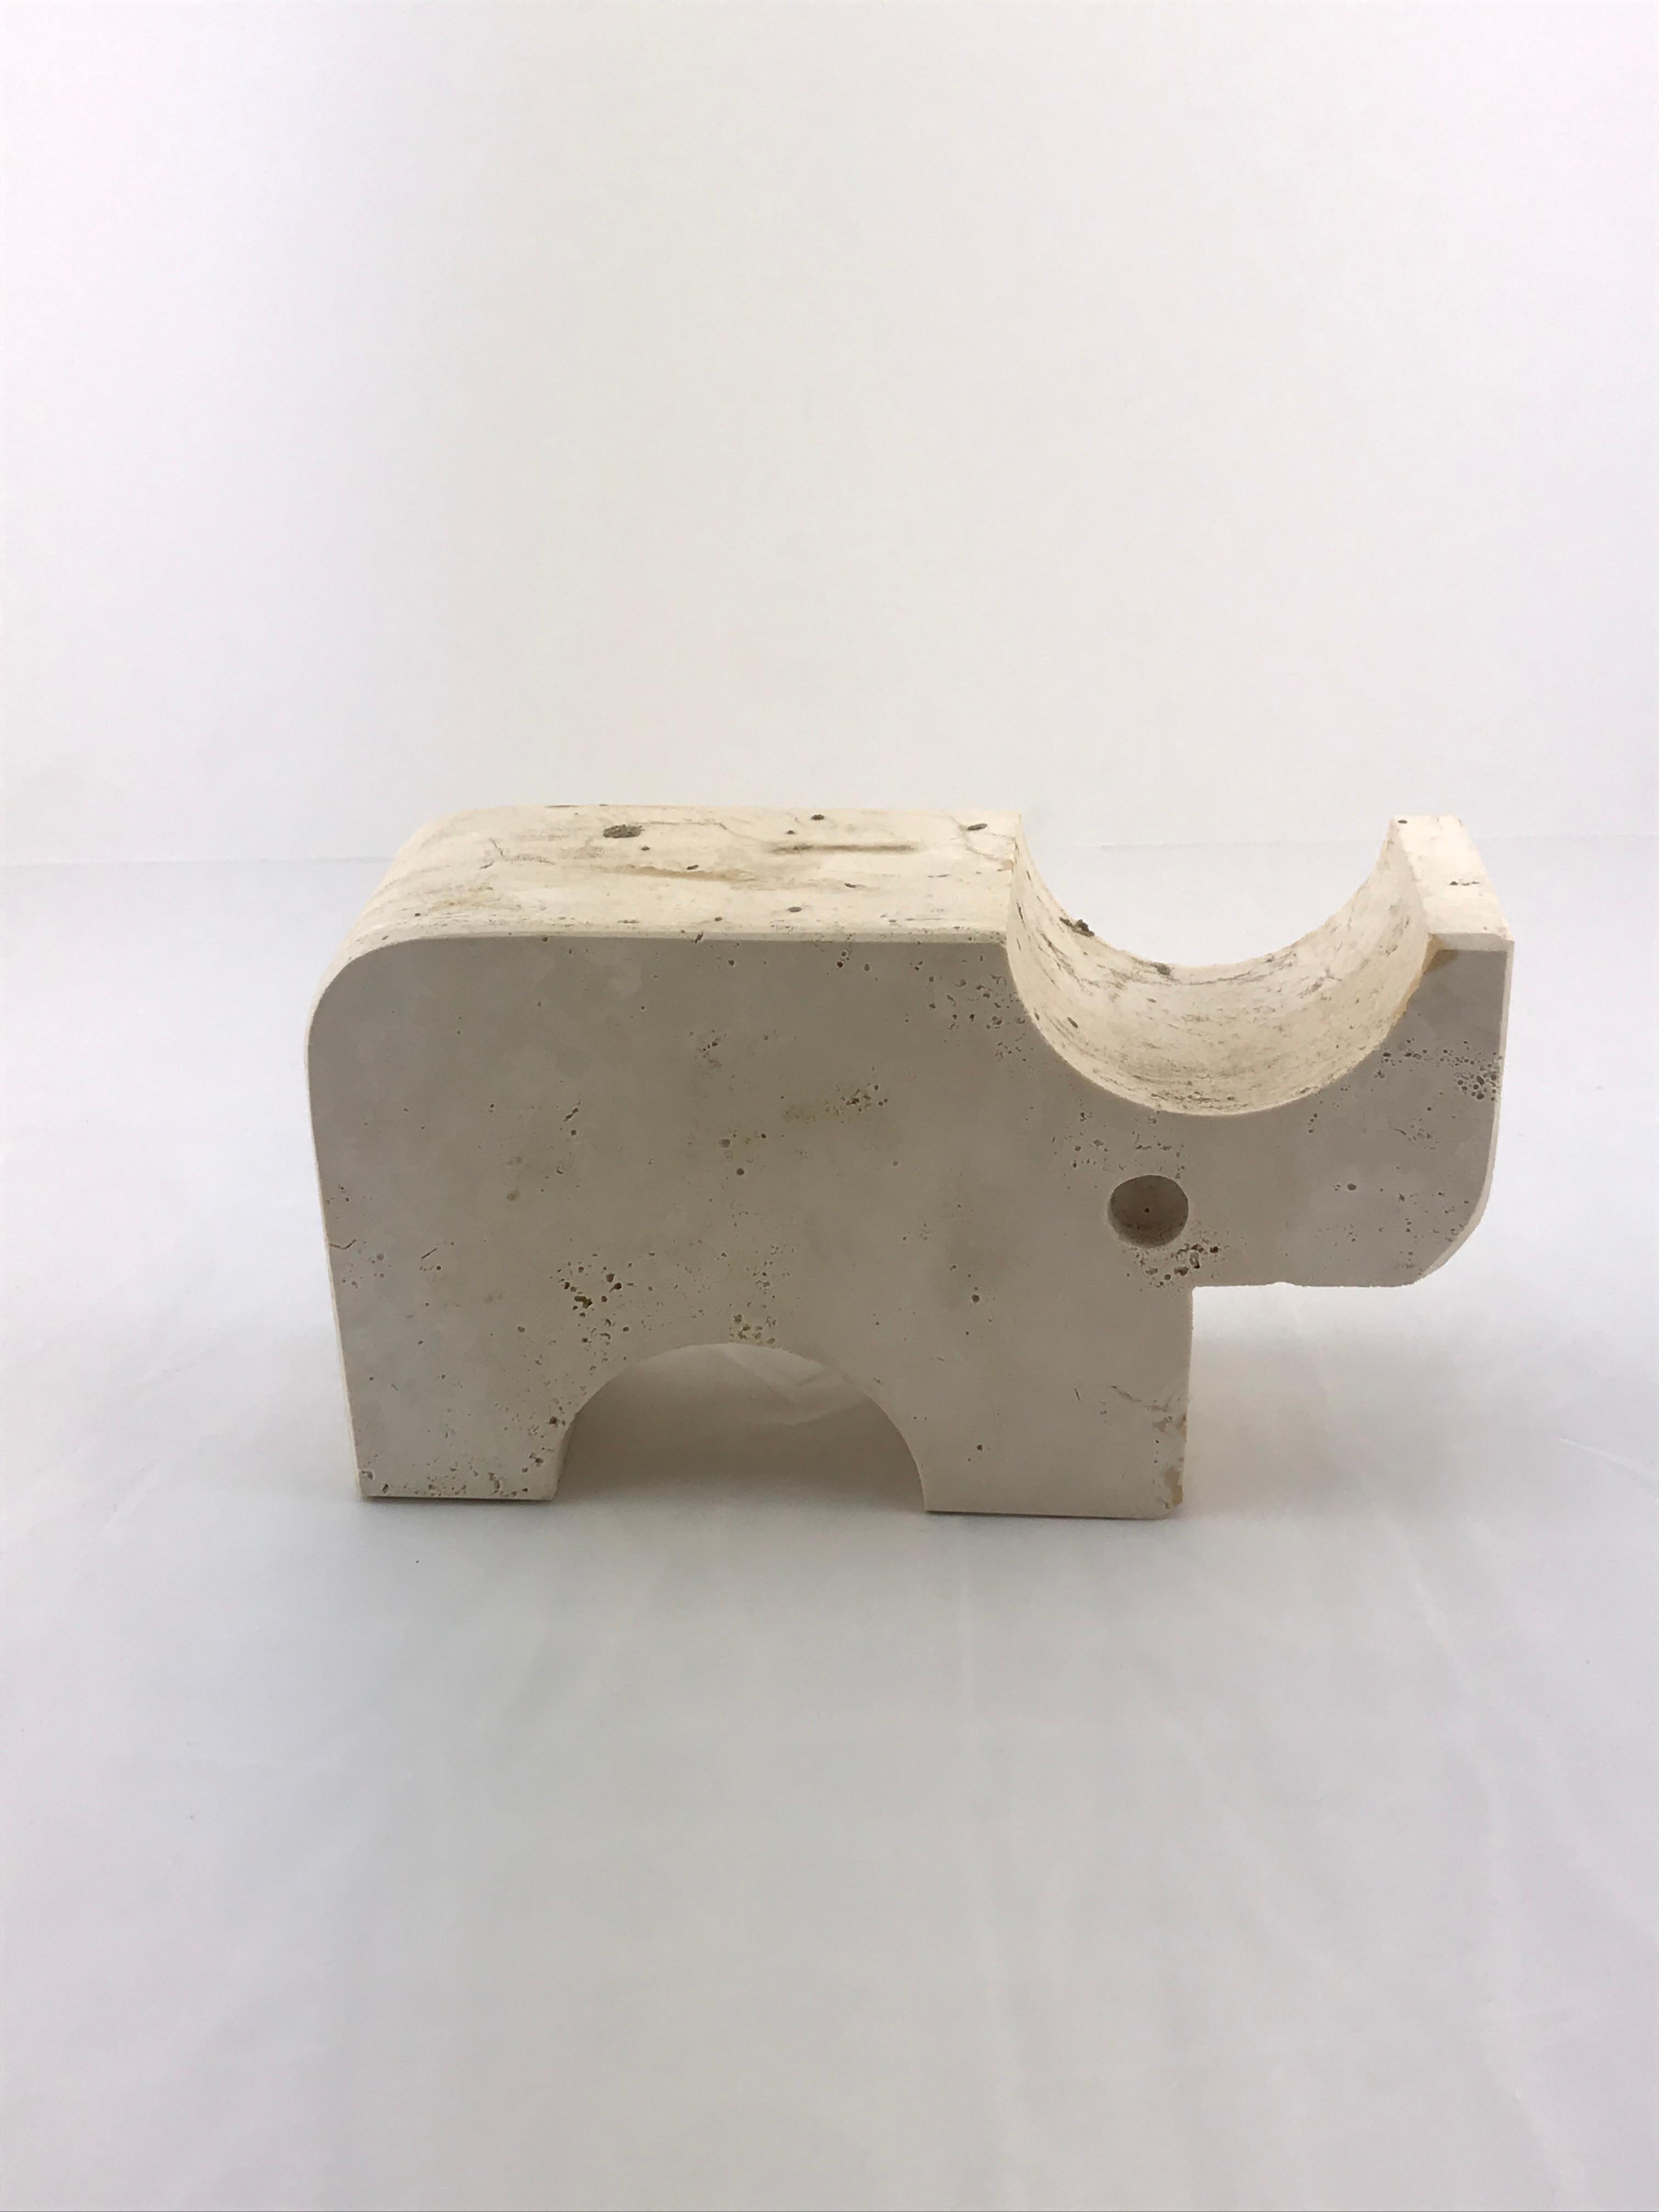 Travertine elephant table sculpture by Mannelli Bros., Florence, Italy (circa 1970s). Joyful travertine stylised Rhino will delight art lovers and collectors. Minimalist in style with soft curves and lines, this sculptures may be displayed as a work